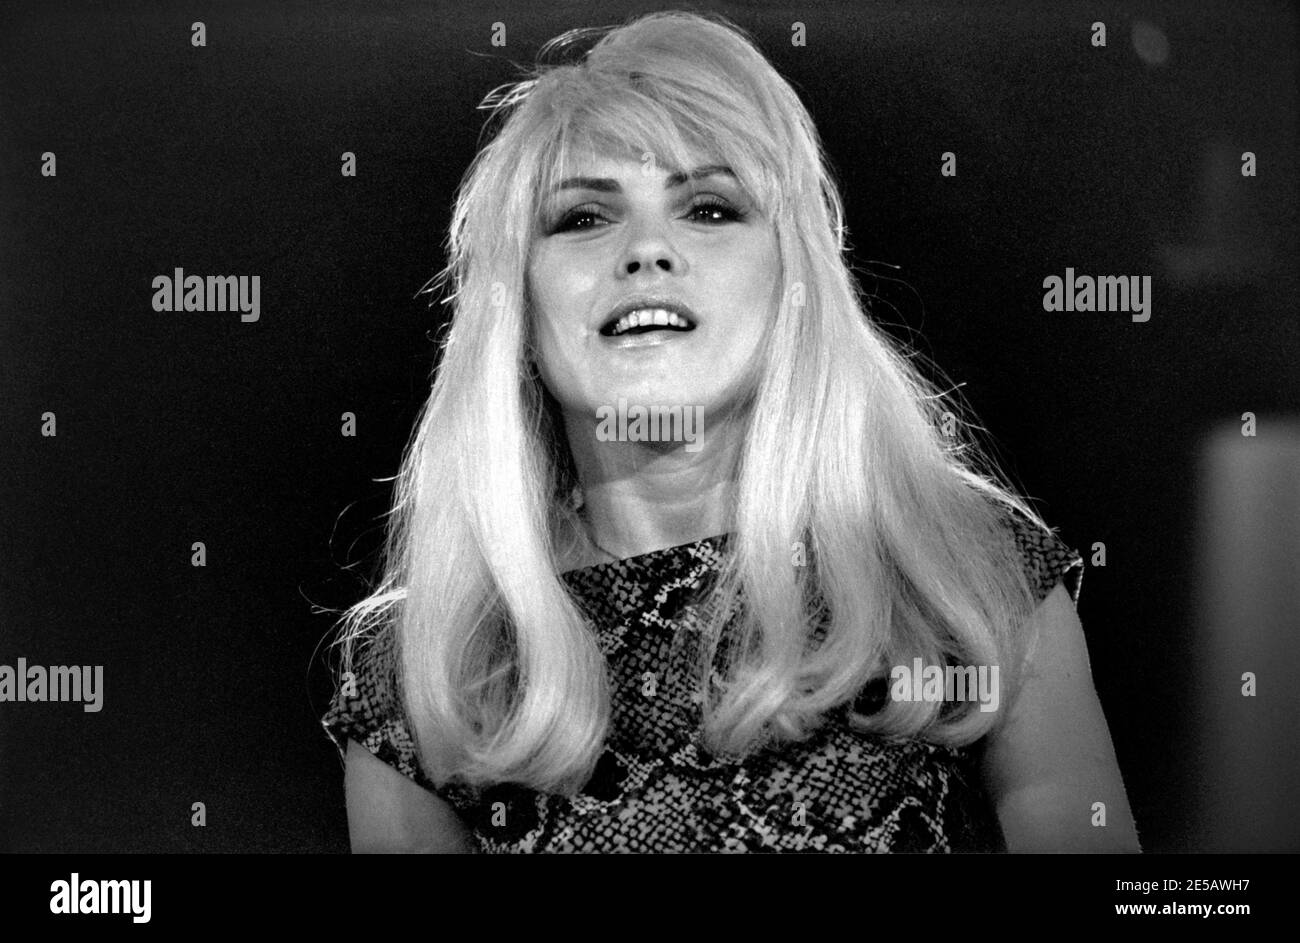 HILVERSUM, THE NETHERLANDS - MAY 05, 1982: Deborah Harry also known as Blondie during the studiorecording of the Dutch hitparade show Toppop. Stock Photo